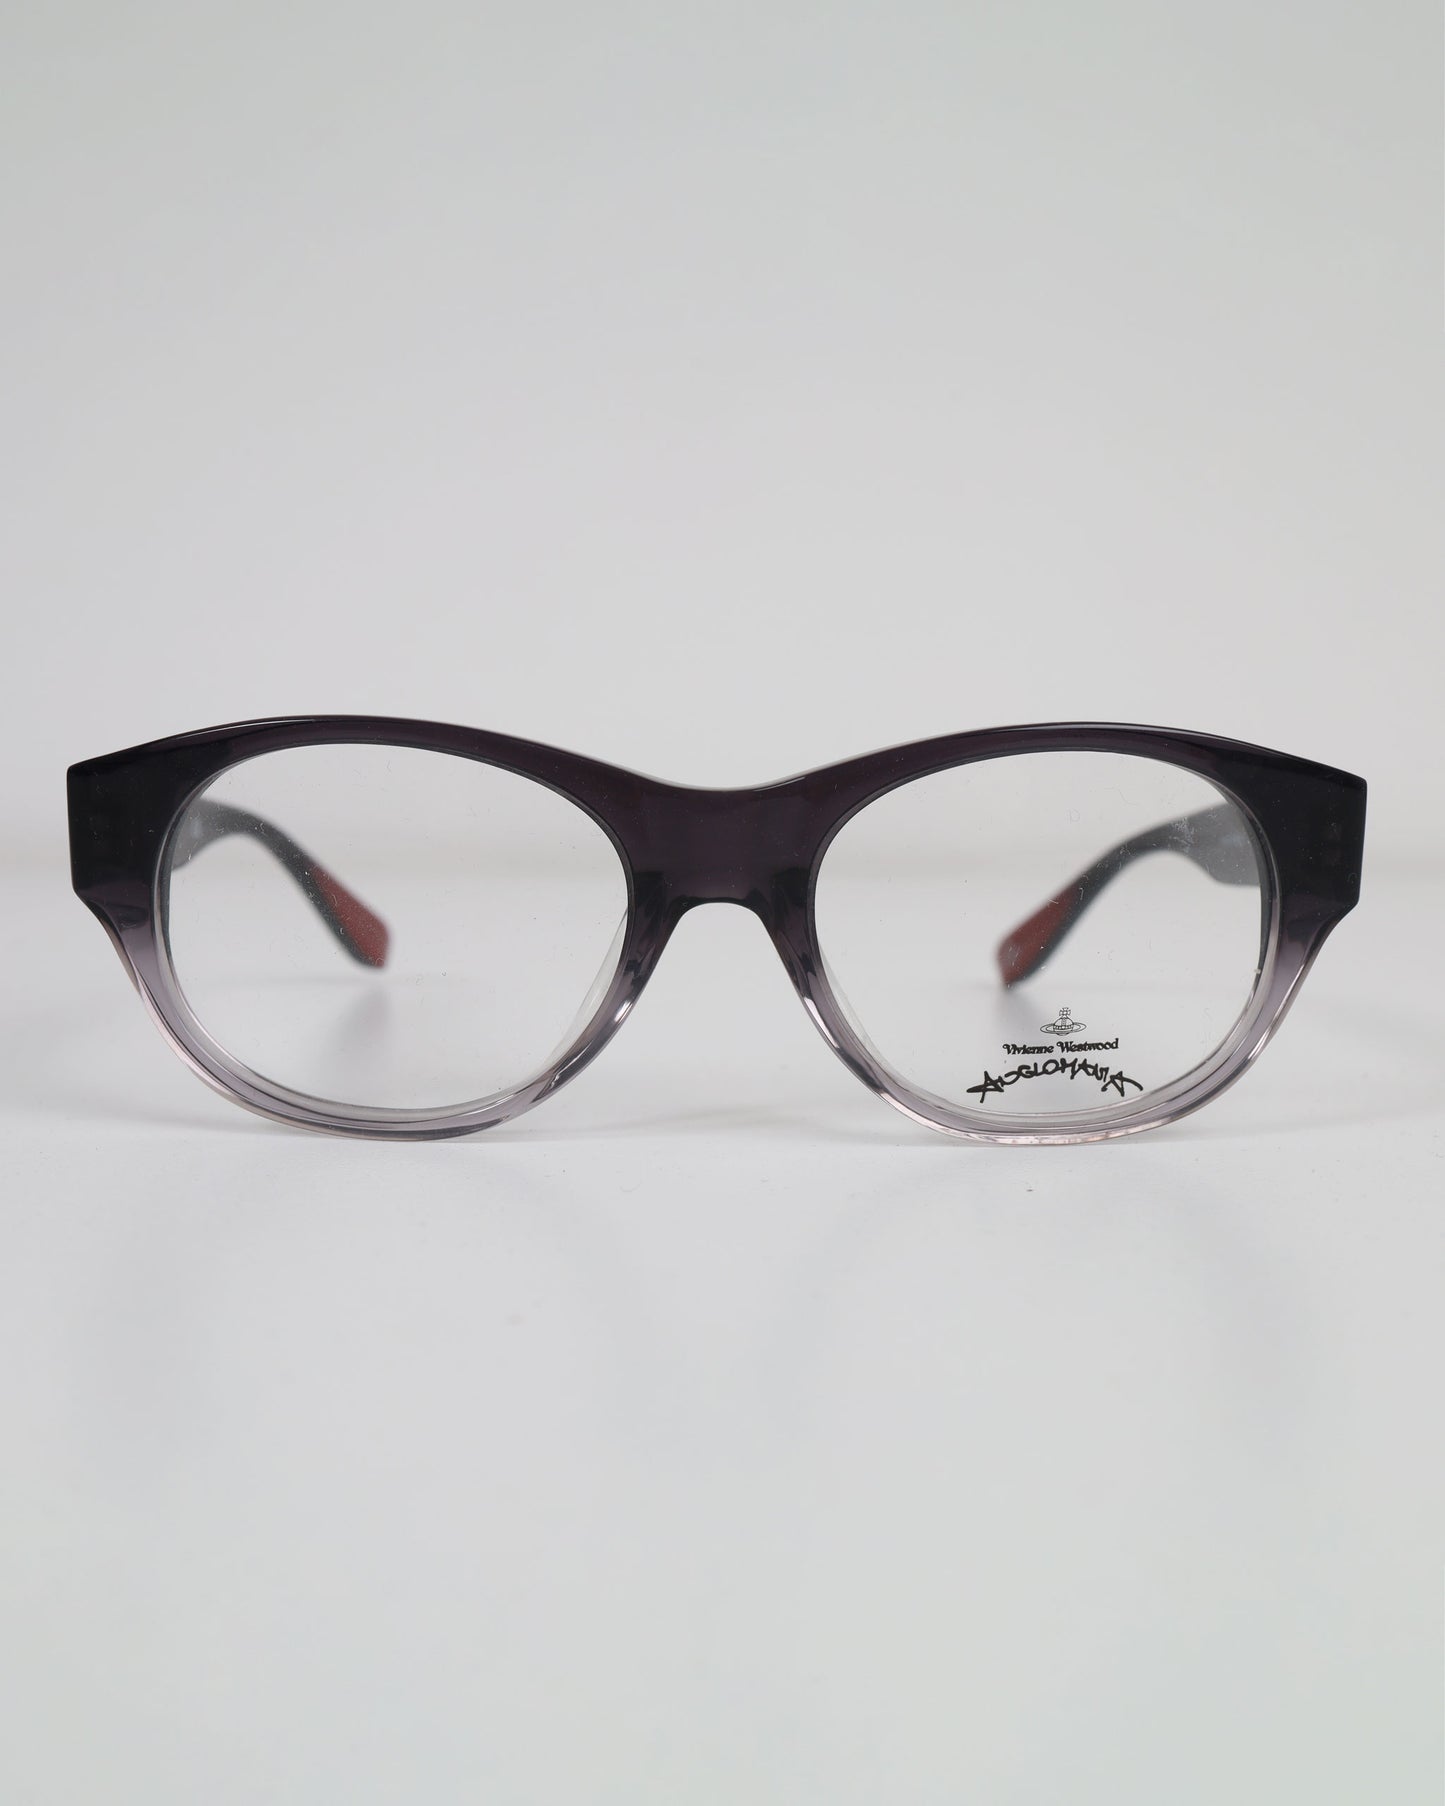 Vivienne Westwood Anglomania Three-Dimensional Pattern Glasses Black/Red